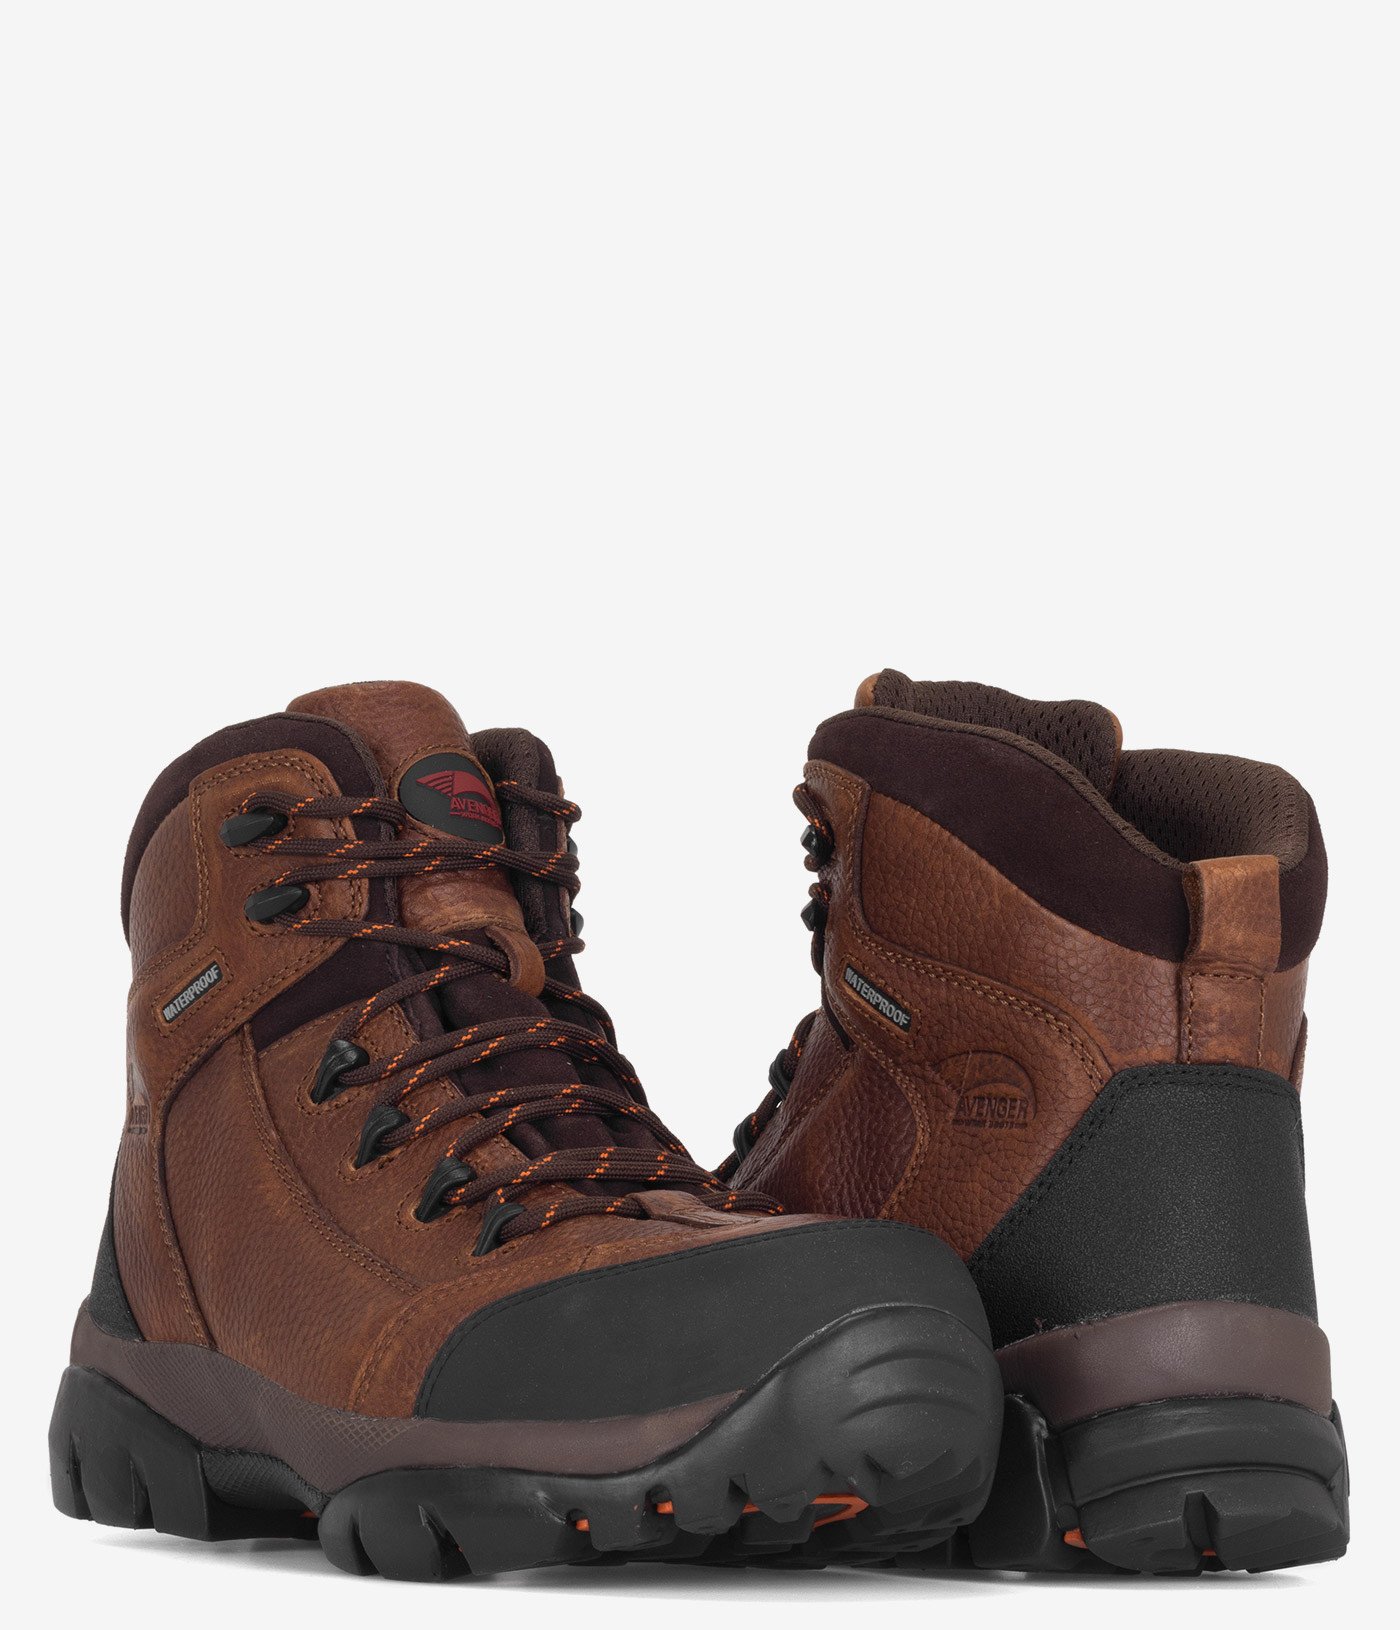 Avenger 6" Leather Waterproof EH Boot | Pair